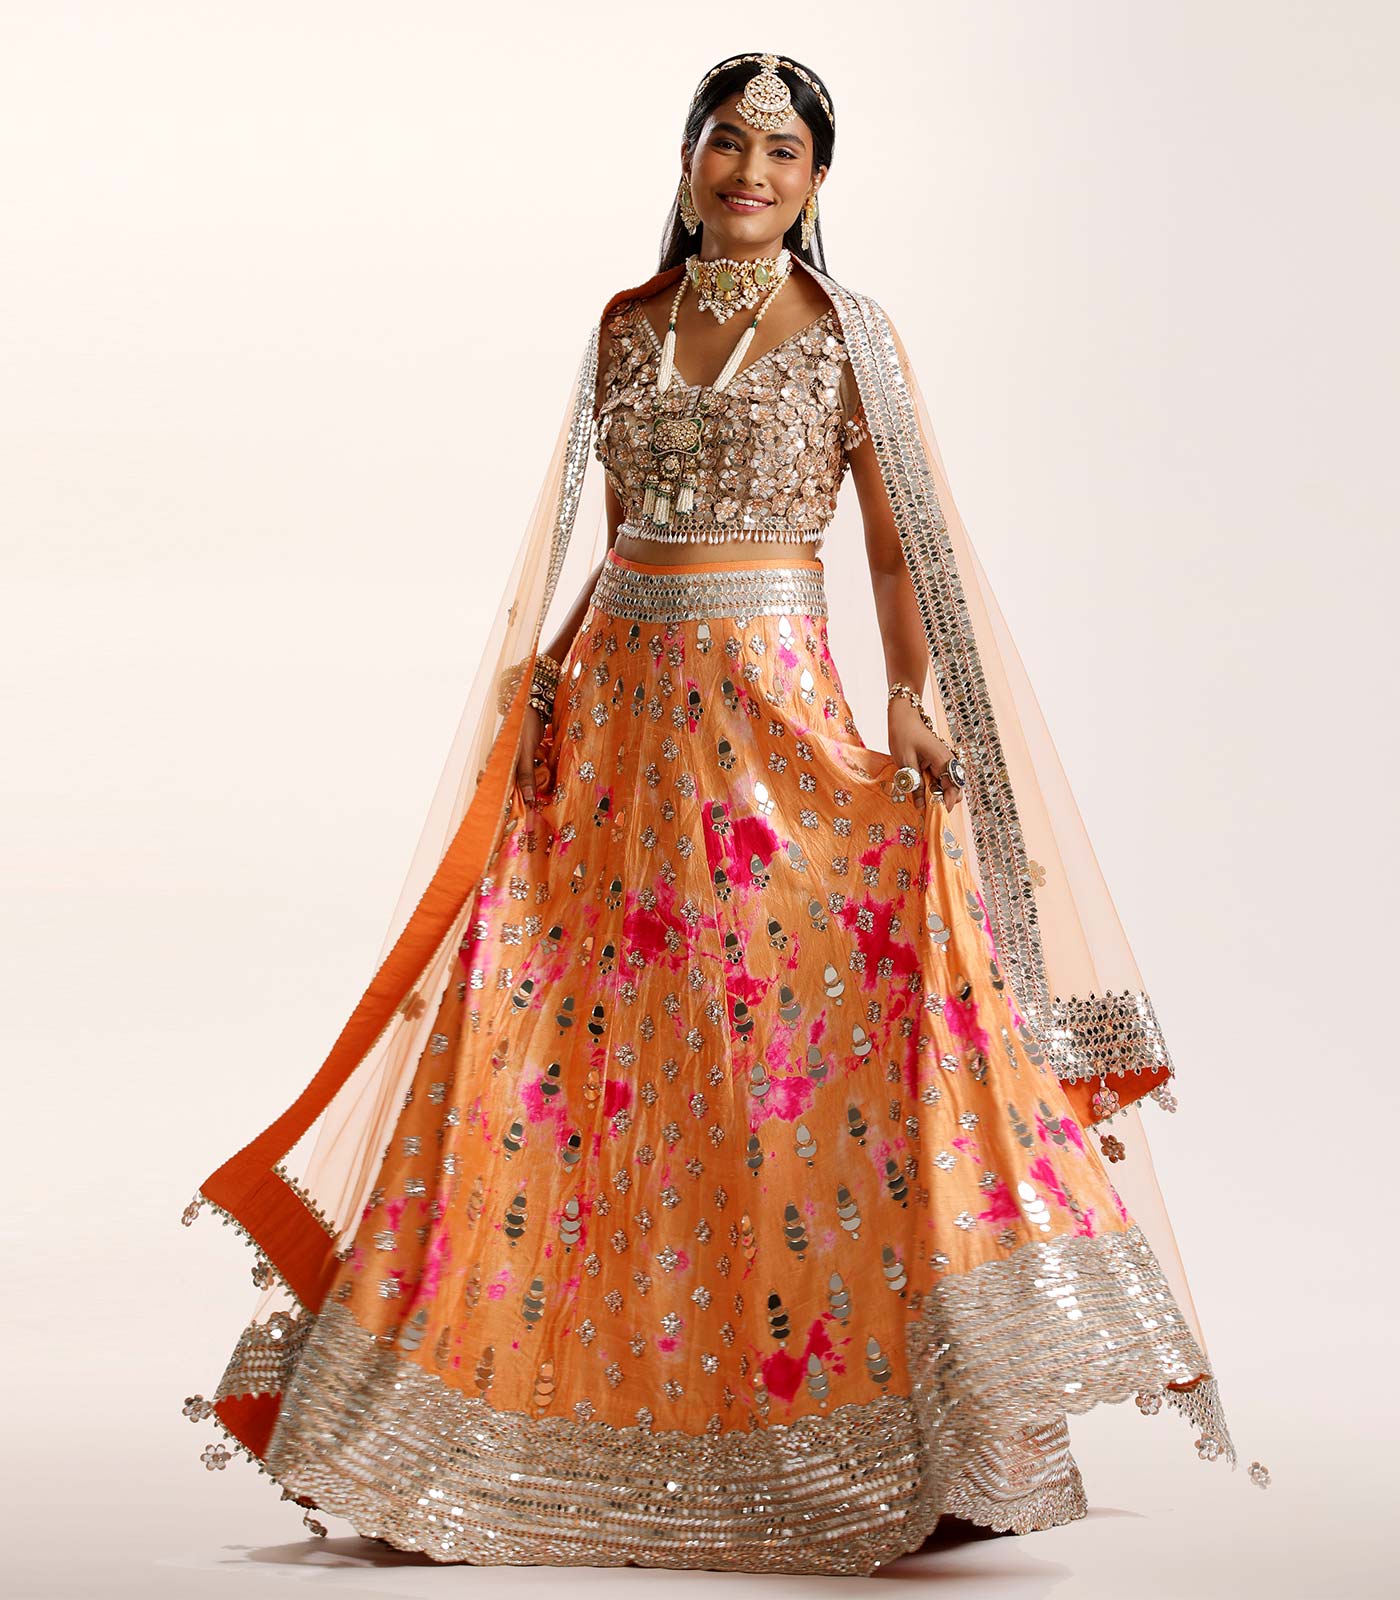 A Gorgeous Day Wedding With A Bride In A Burnt Orange Wedding Lehenga! |  Gorgeous wedding, Mumbai wedding, Bride